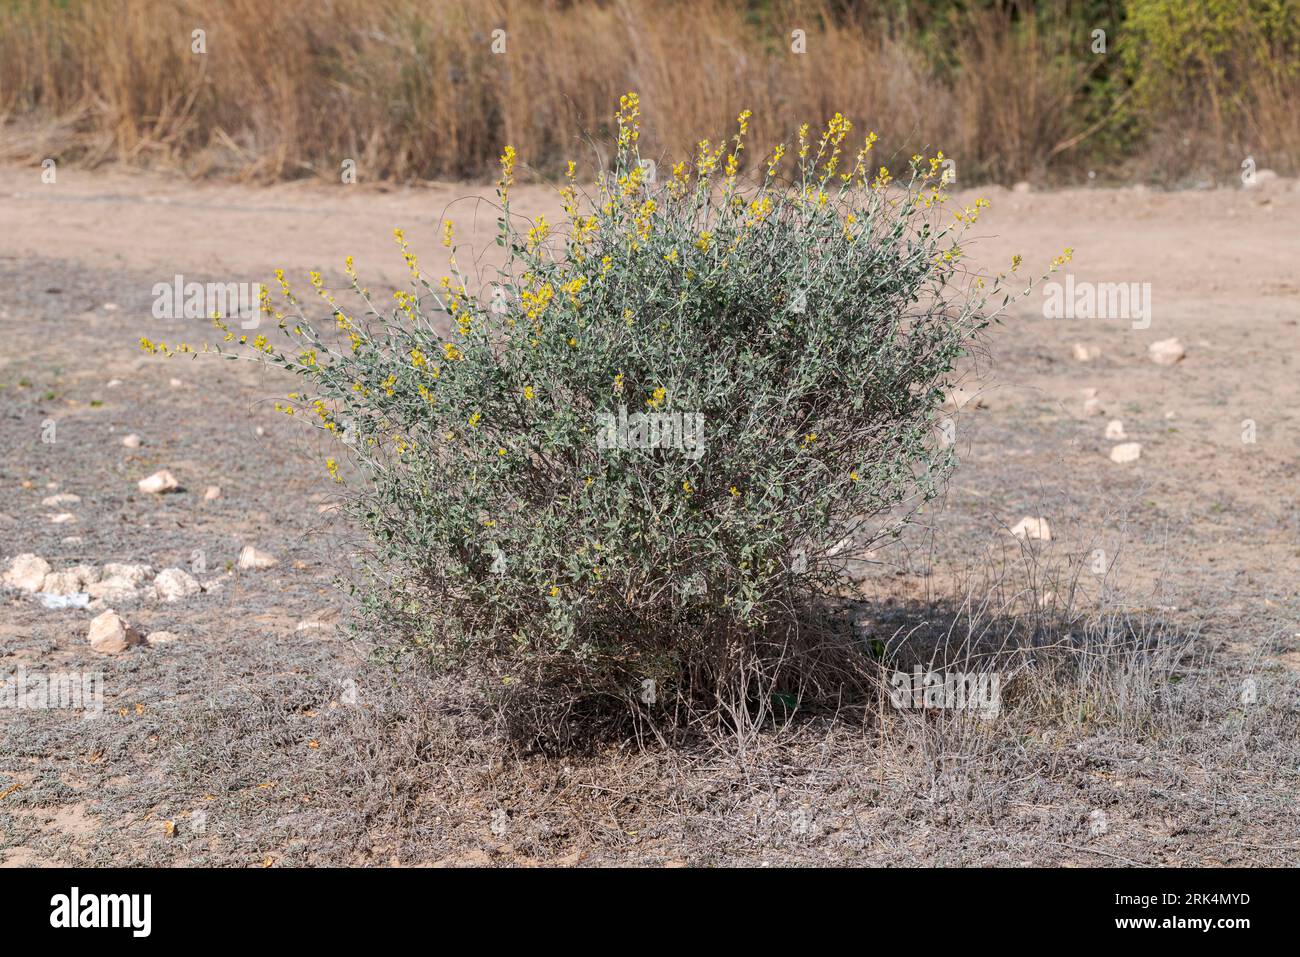 Anthyllis cytisoides. Photo taken in Carabassi Beach, province of Alicante, Spain Stock Photo